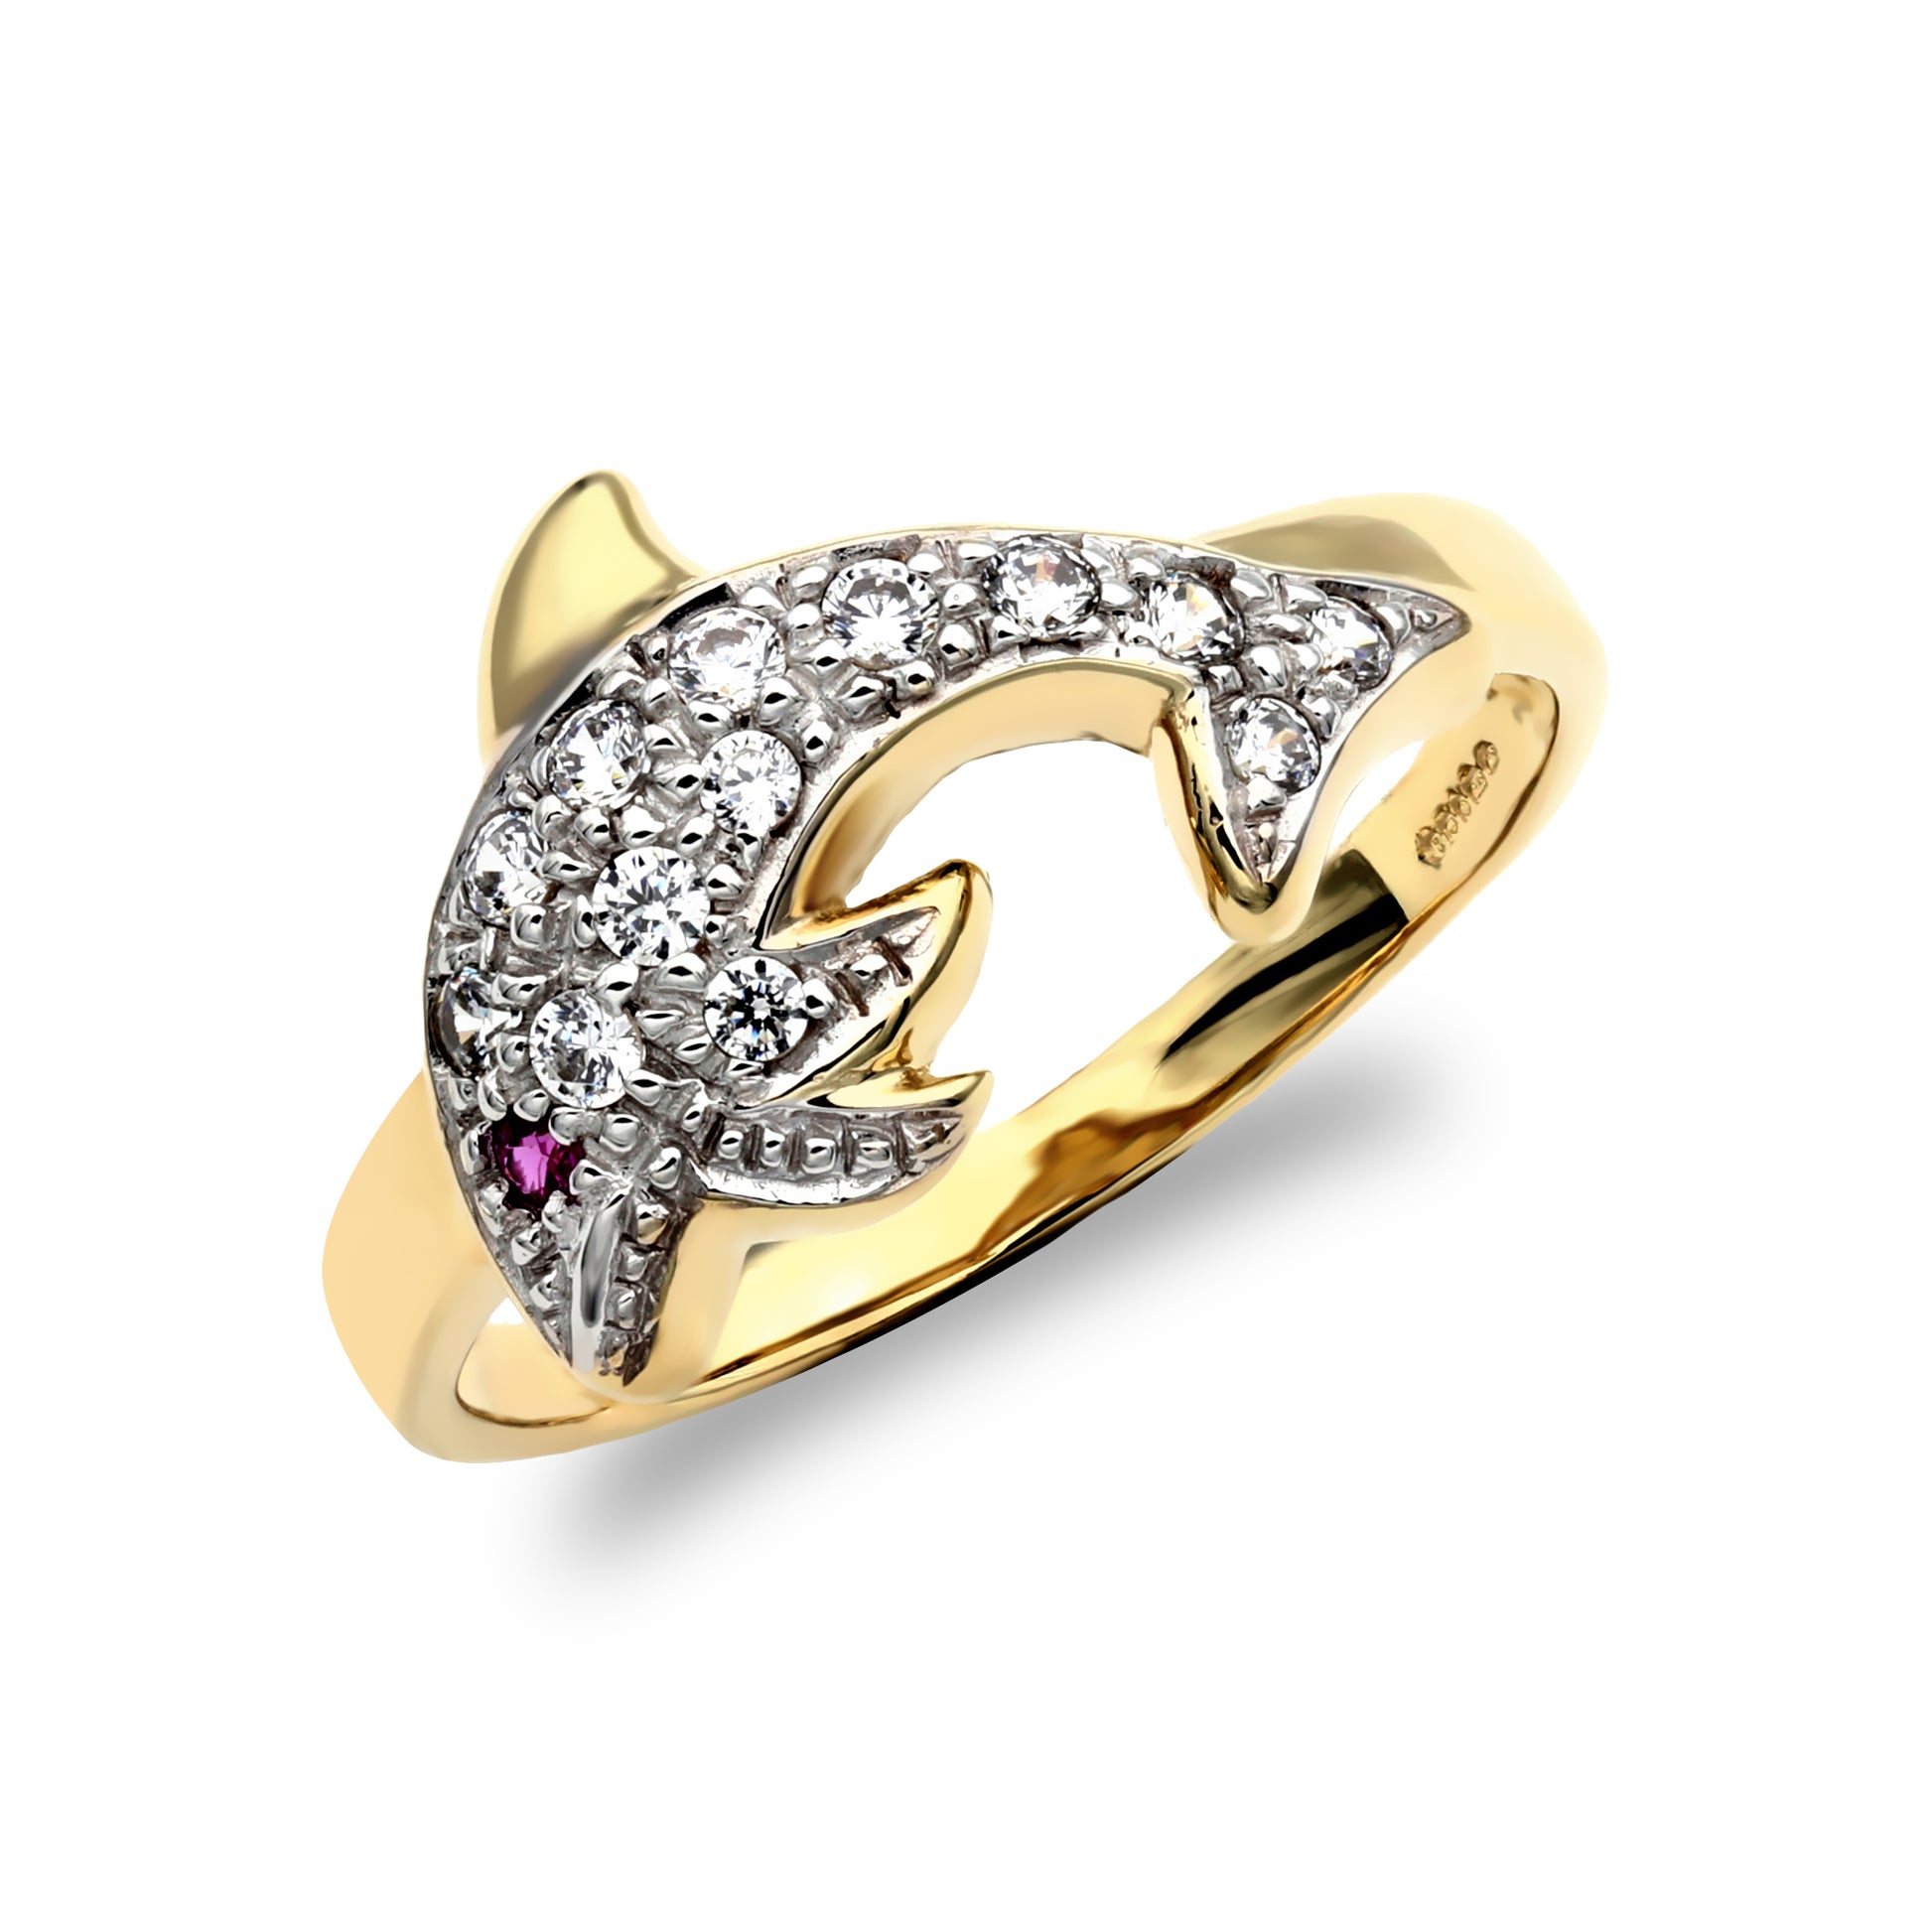 9ct Gold  Red and White CZ Pave Dolphin Ring - JRN348